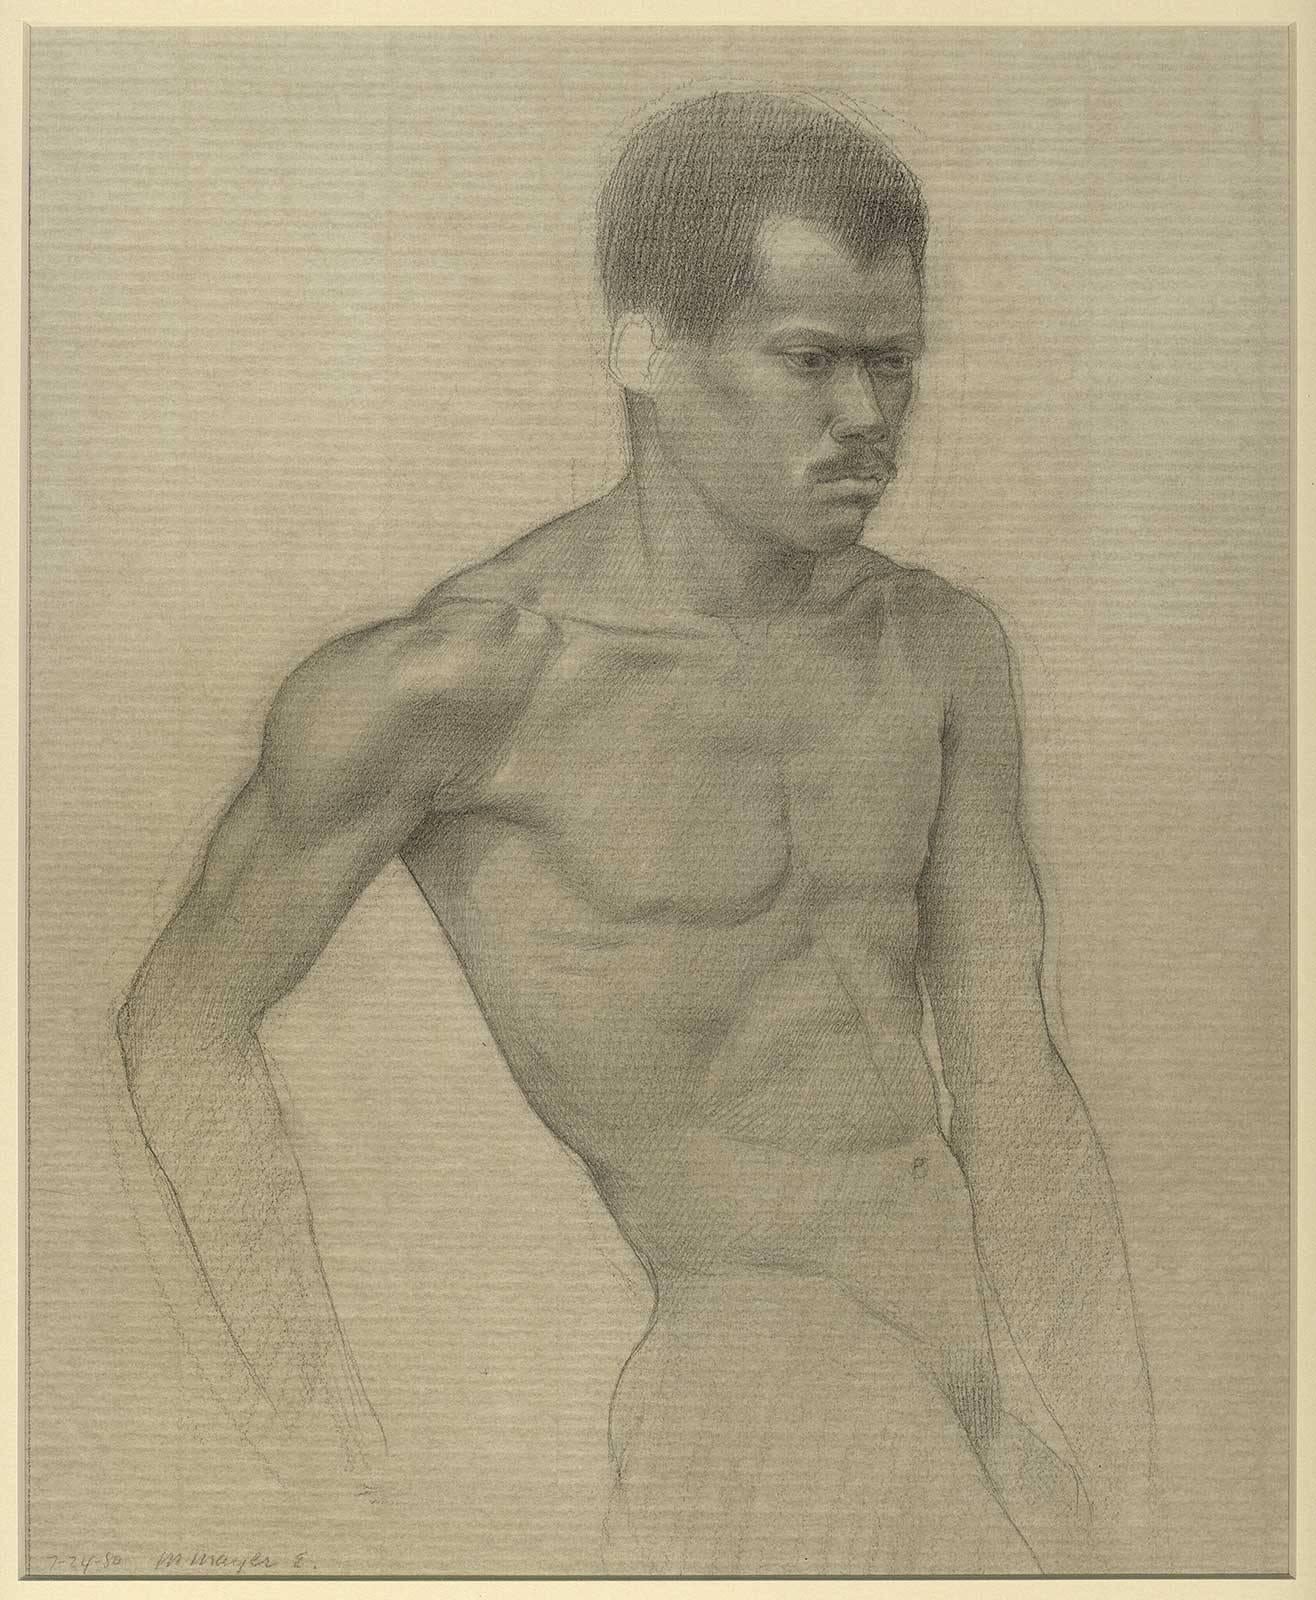 Martha Erlebacher Nude - Man of Color (pencil drawing of a nude black man)